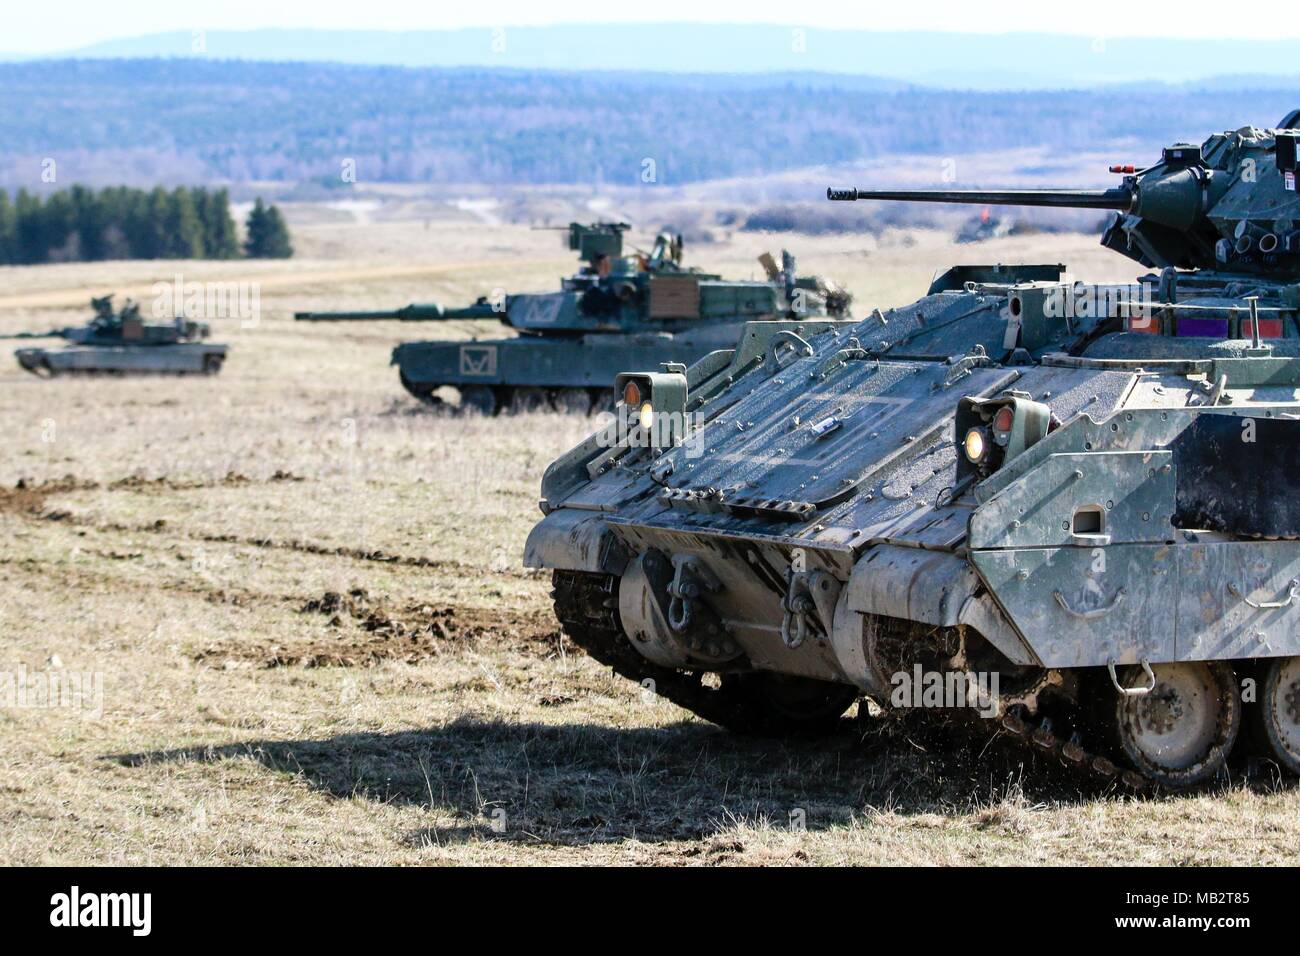 A M2 Bradley fighting vehicle and a group of M1 Abrams tanks with the 2nd Armored Brigade Combat Team, 1st Infantry Division, secure an area during a Robotic Complex Breach Concept demonstration at Grafenwoehr Training Area, Germany, April 6, 2018. The Robotic Complex Breach Concept employes the use of Robotic and Autonomous Systems (RAS) for intelligence, suppression, obscuration, and reduction missions. (U.S. Army photo by Spc. Hubert D. Delany III / 22nd Mobile Public Affairs Detachment)  Stock Photo